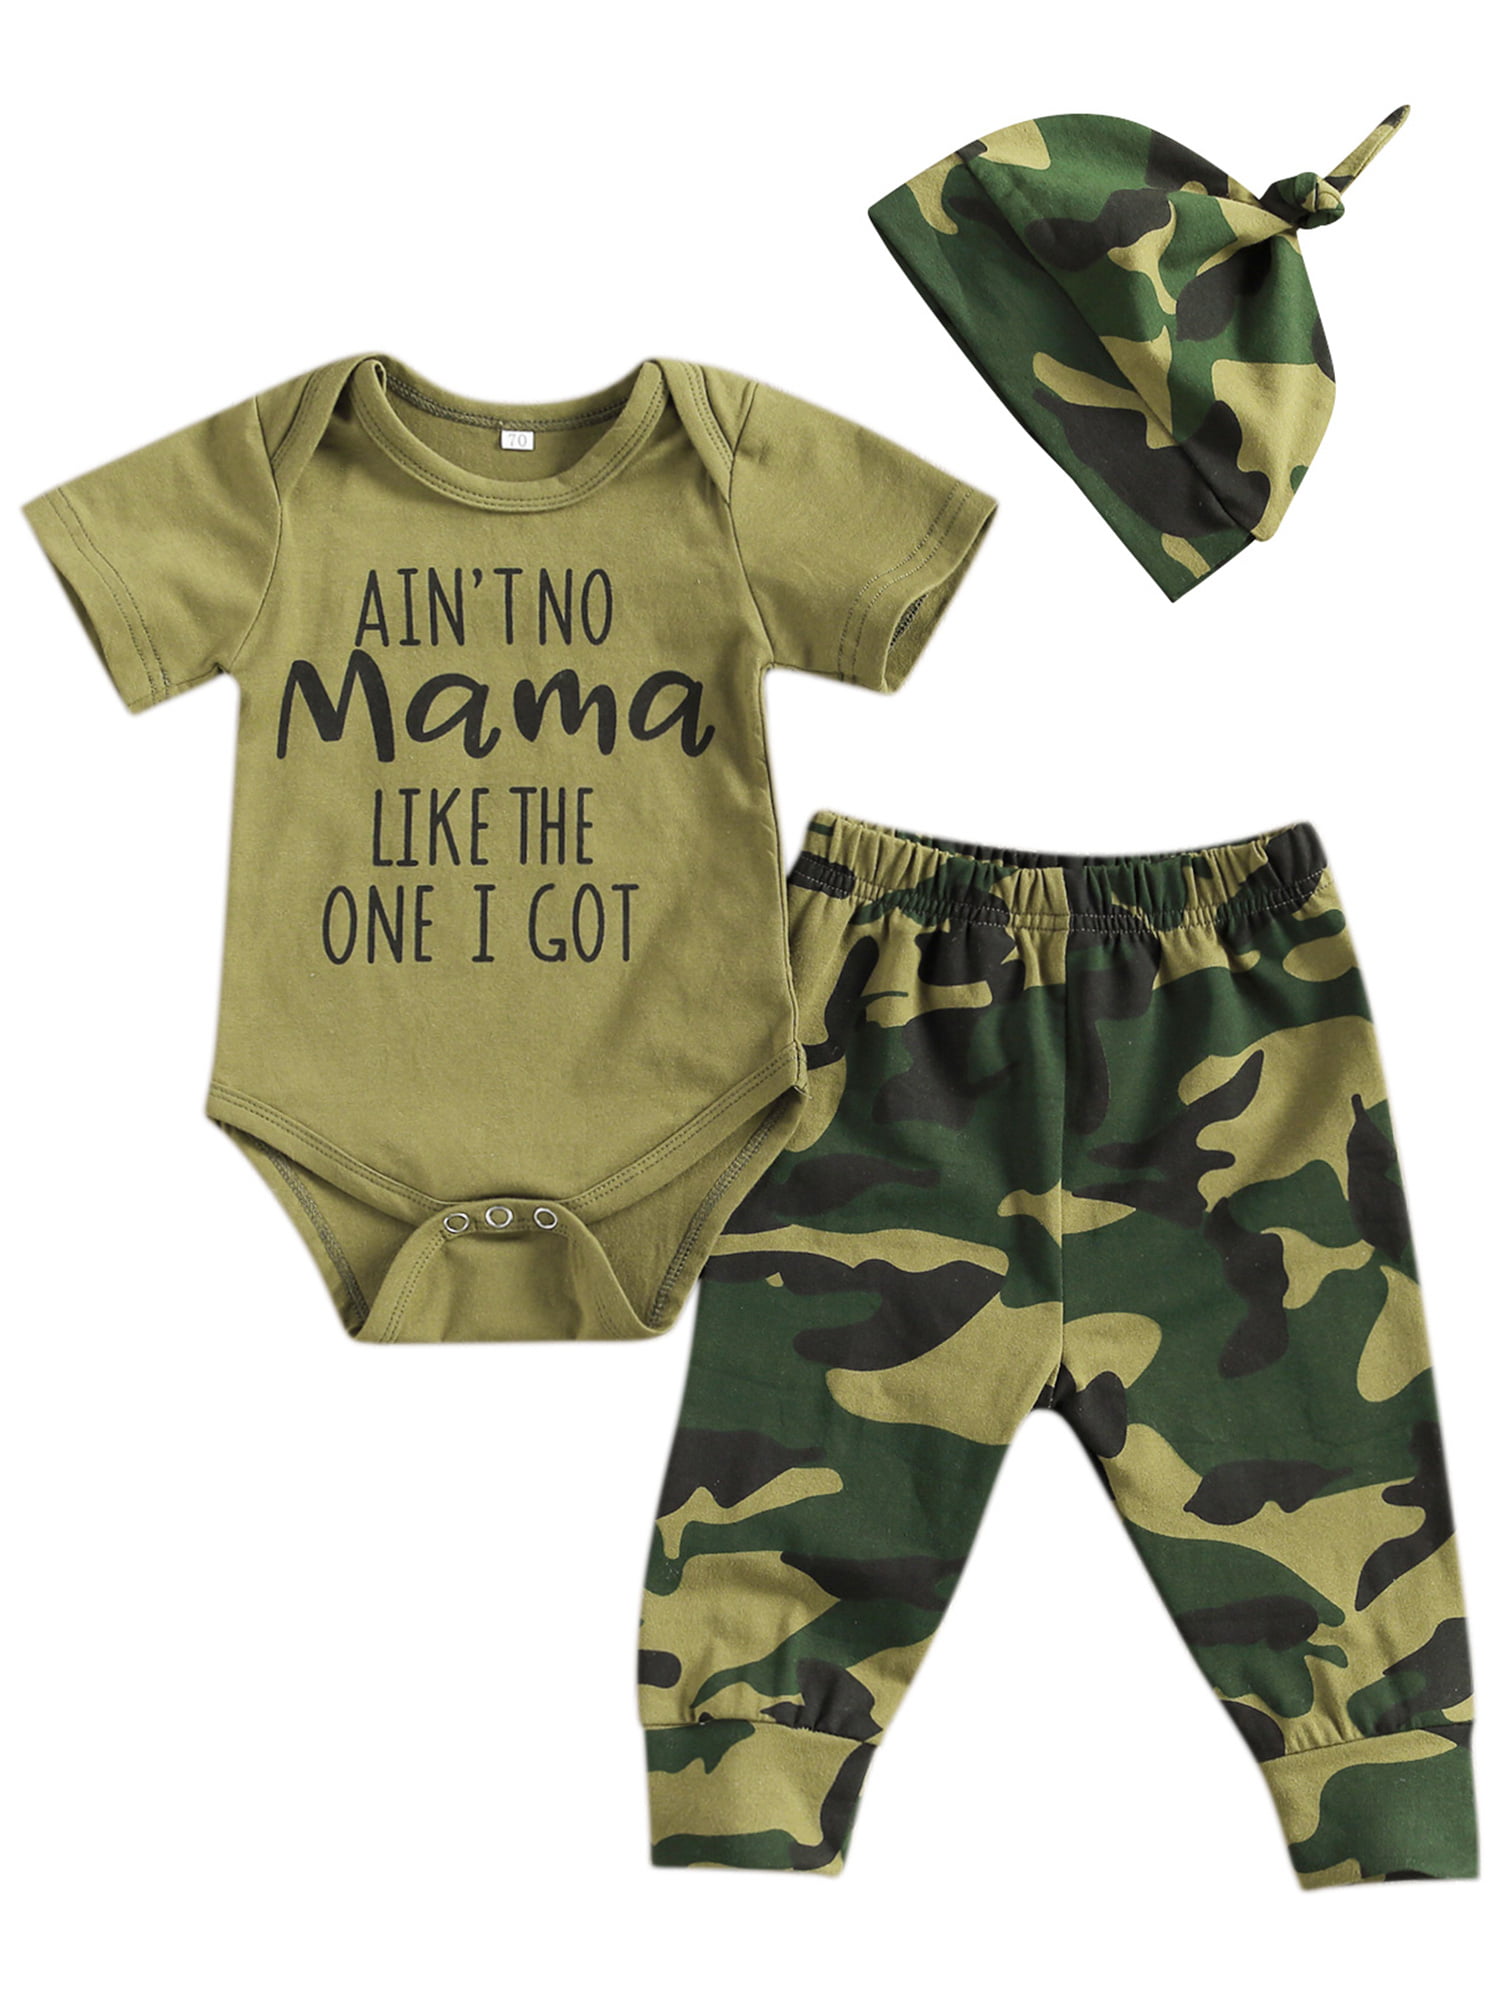 Newborn Boy Outfits Clothes Set Baby Camouflage Clothing Mama's BOY Long Sleeve Romper and Pants with Hat 0-24 Months